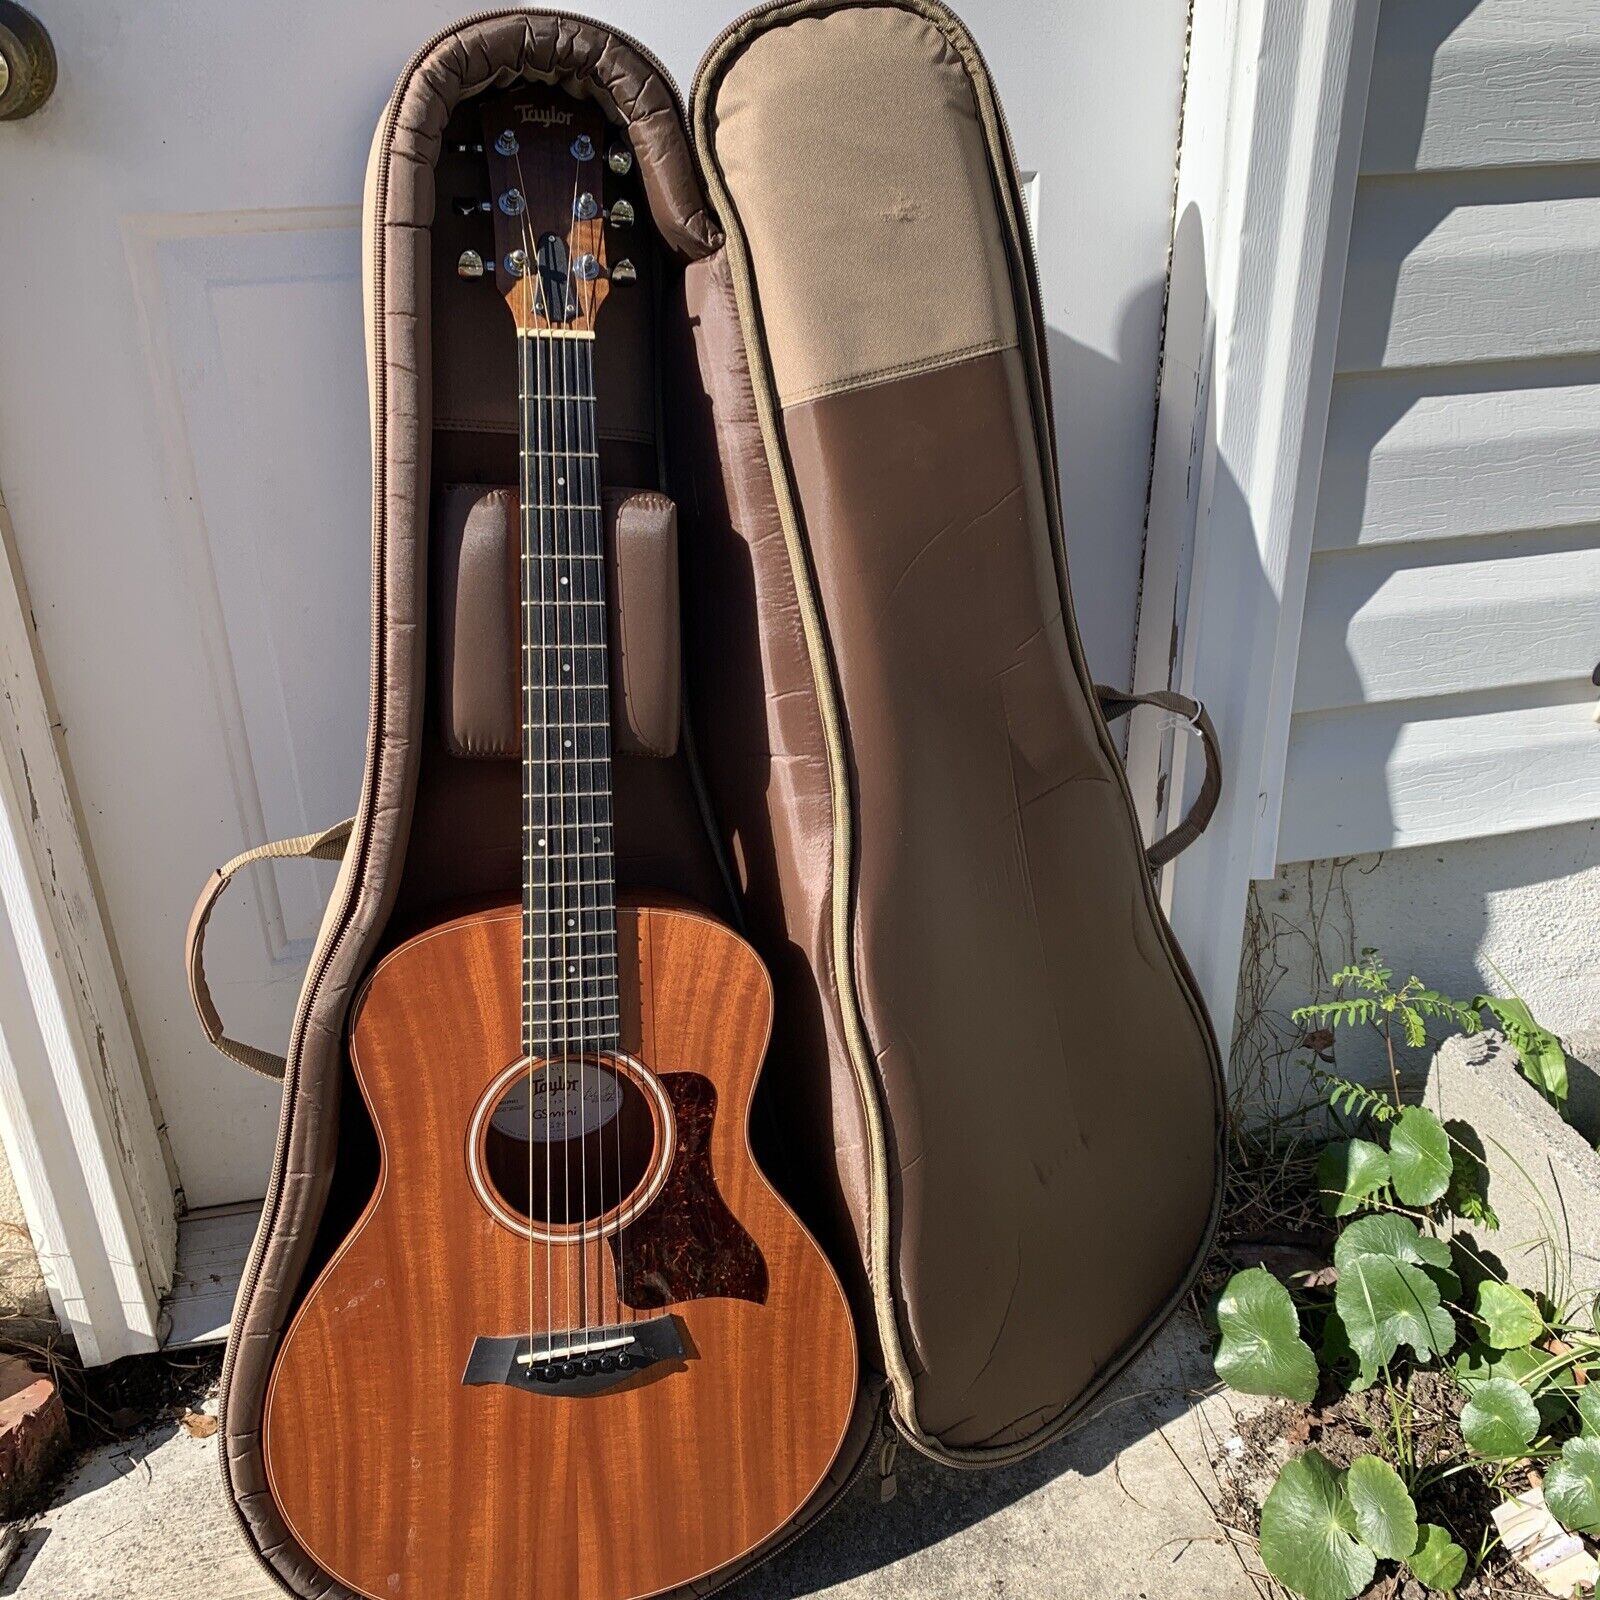 Taylor GS Mini Mahogany 6 String Acoustic Guitar - With Original Case